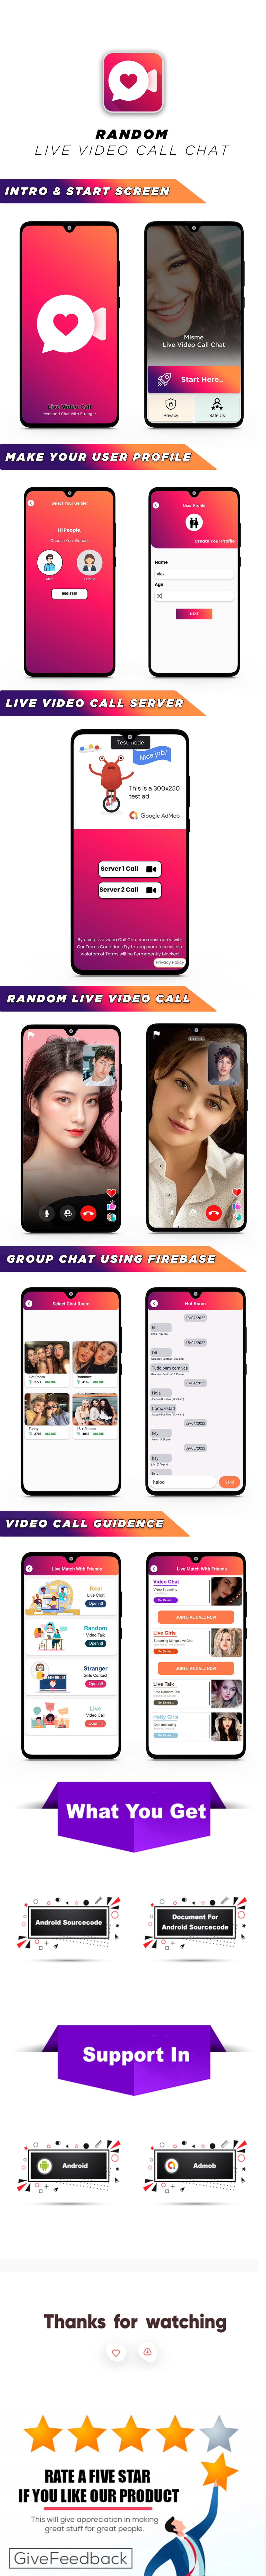 Real Live Random Video Call, Live Video Call Chat, Group Chat, 1 to 1 Video Call - 5